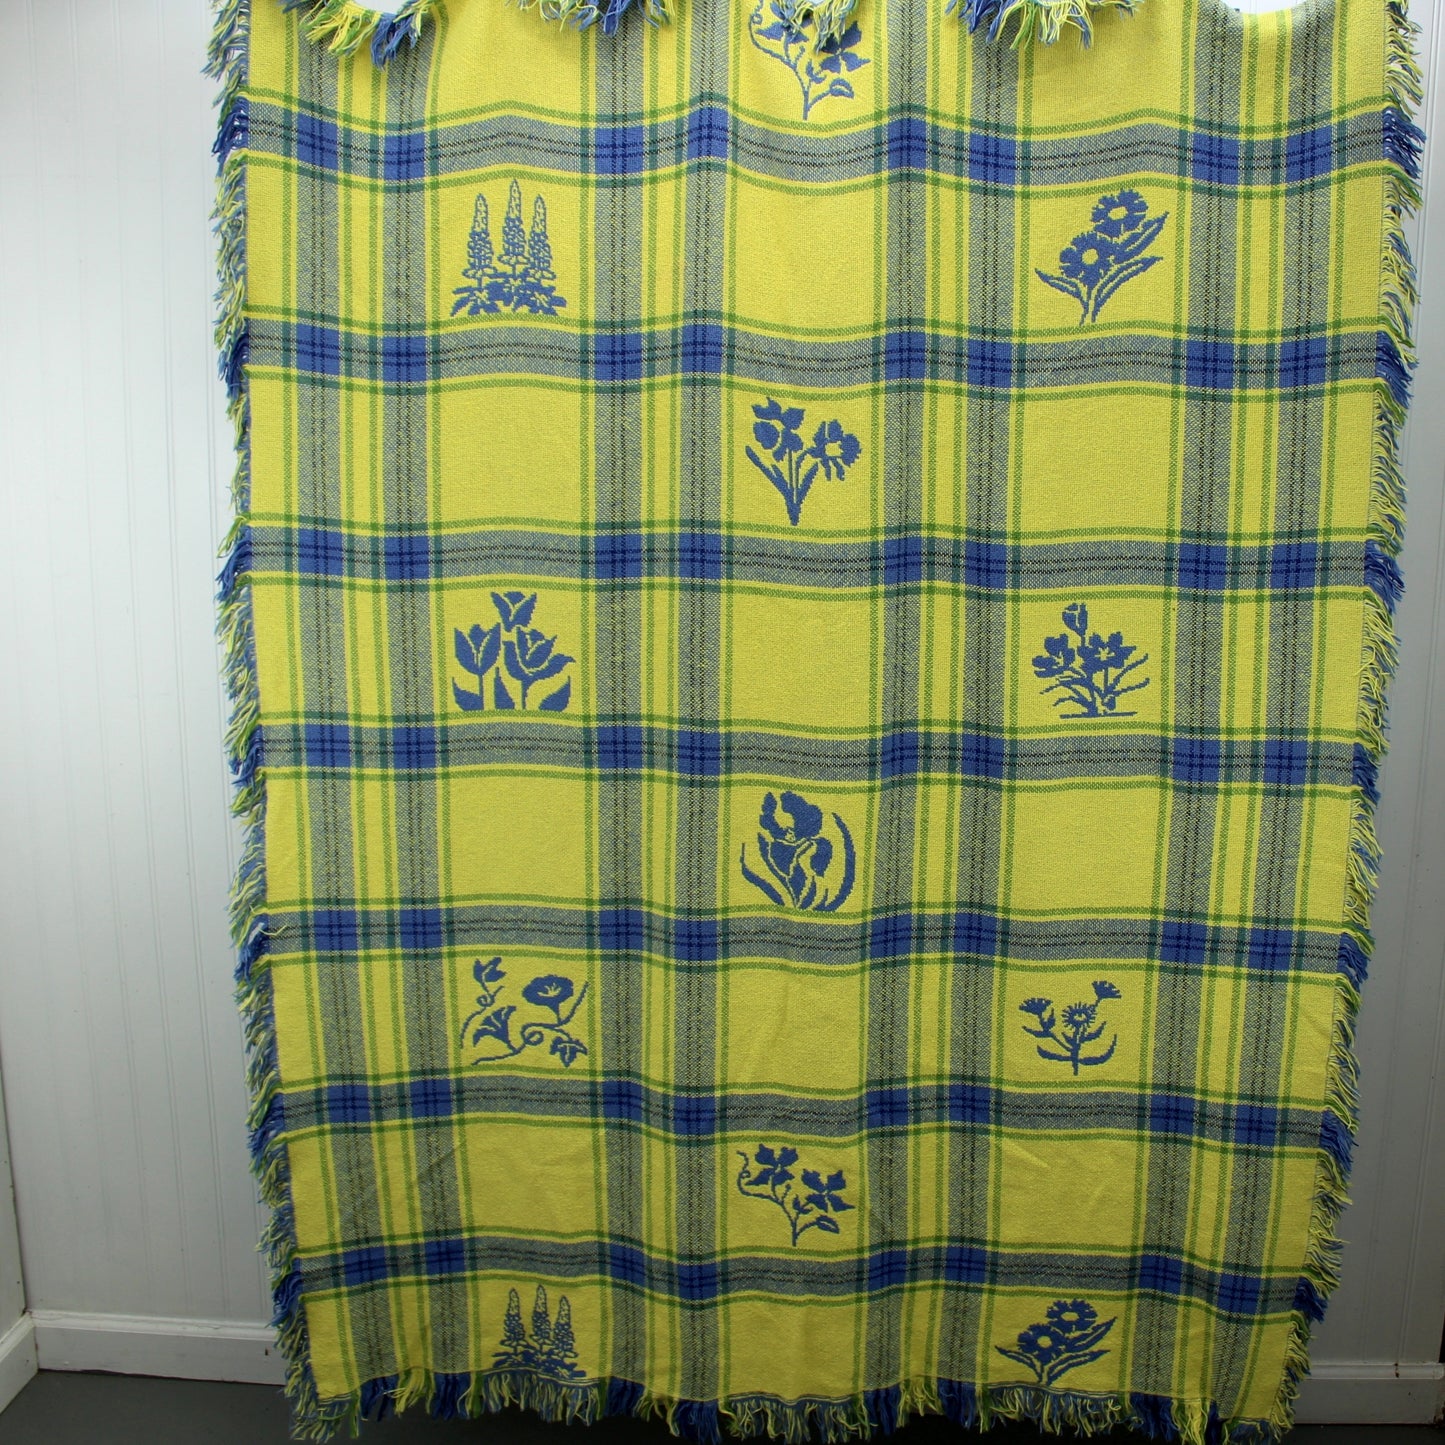 Cotton Throw Blanket Yellow Periwinkle Blue Plaid Squares Wildflowers yellow side full view